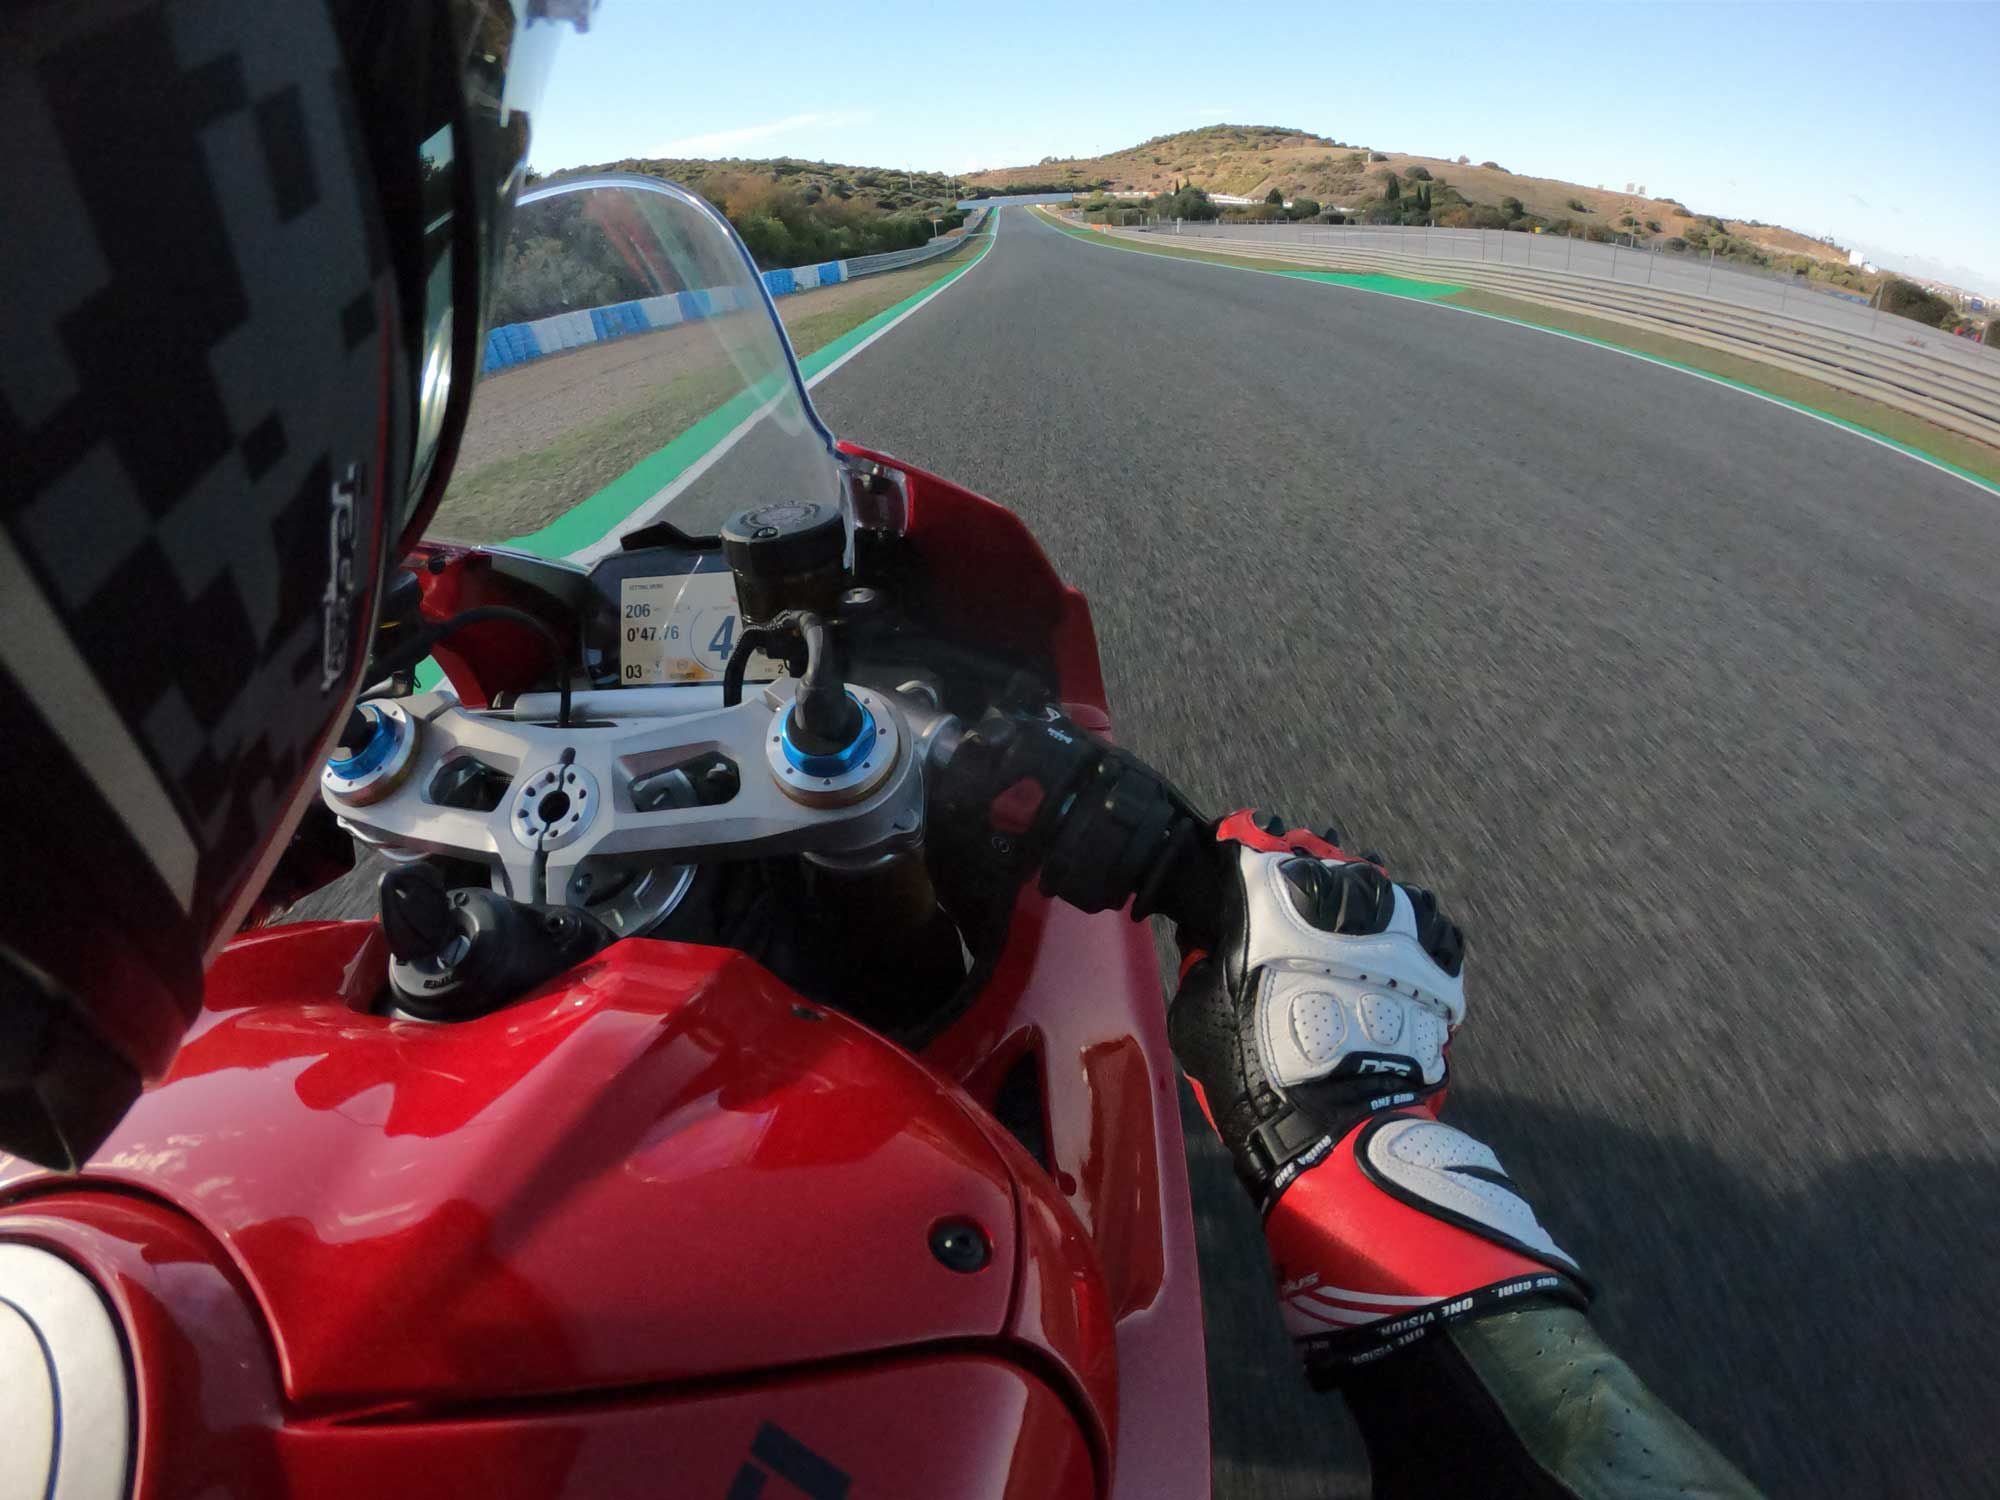 We were impressed with the intimate feel of the Panigale’s 1,103cc V-Four in its most aggressive Full power setting.